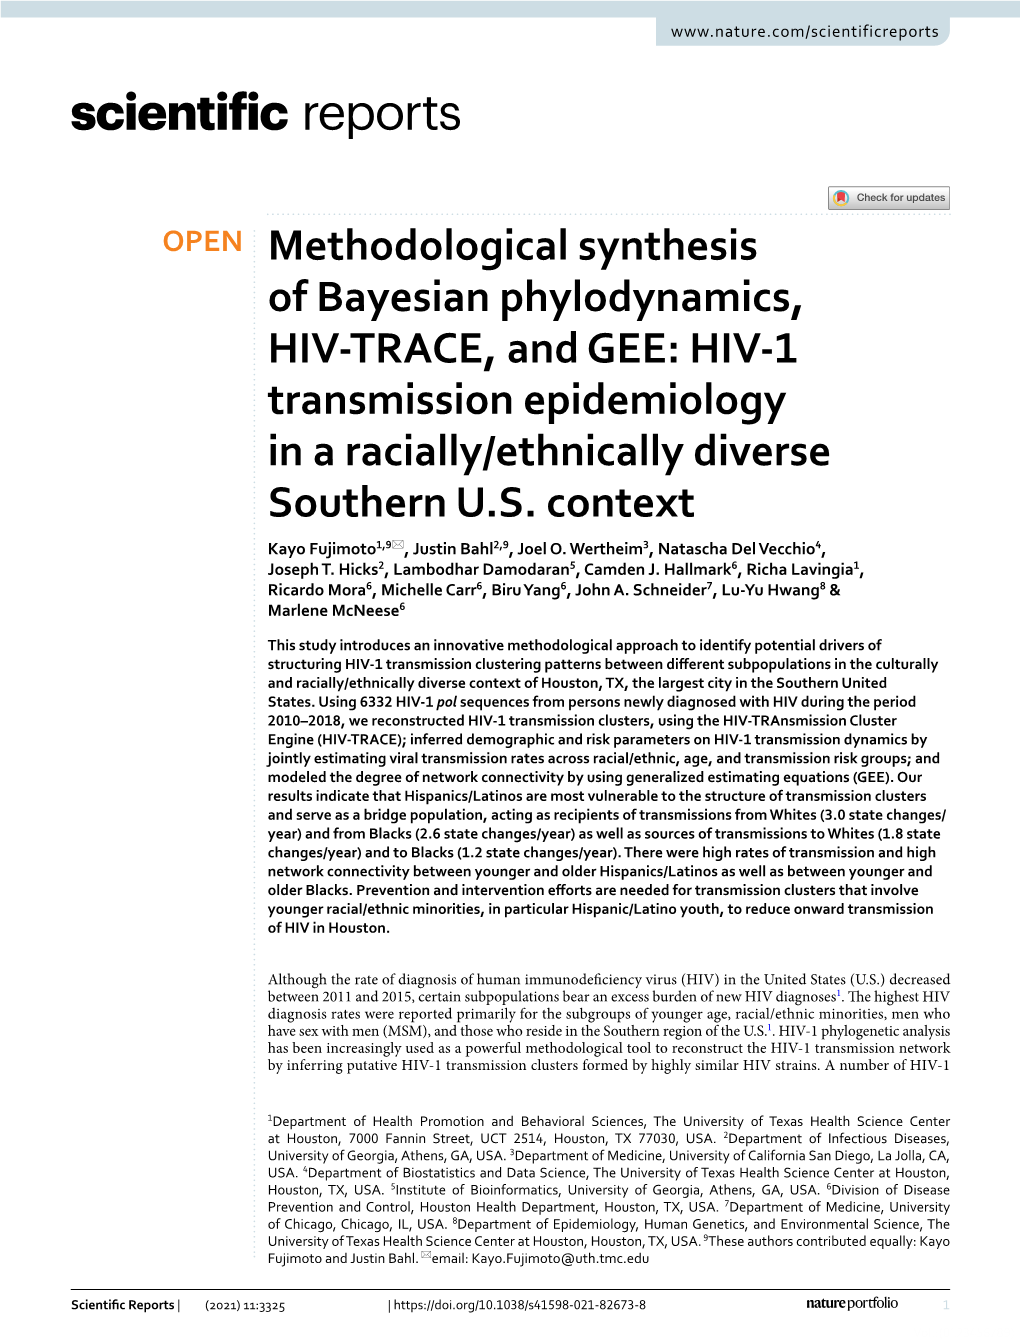 HIV-1 Transmission Epidemiology in a Racially/Ethnically